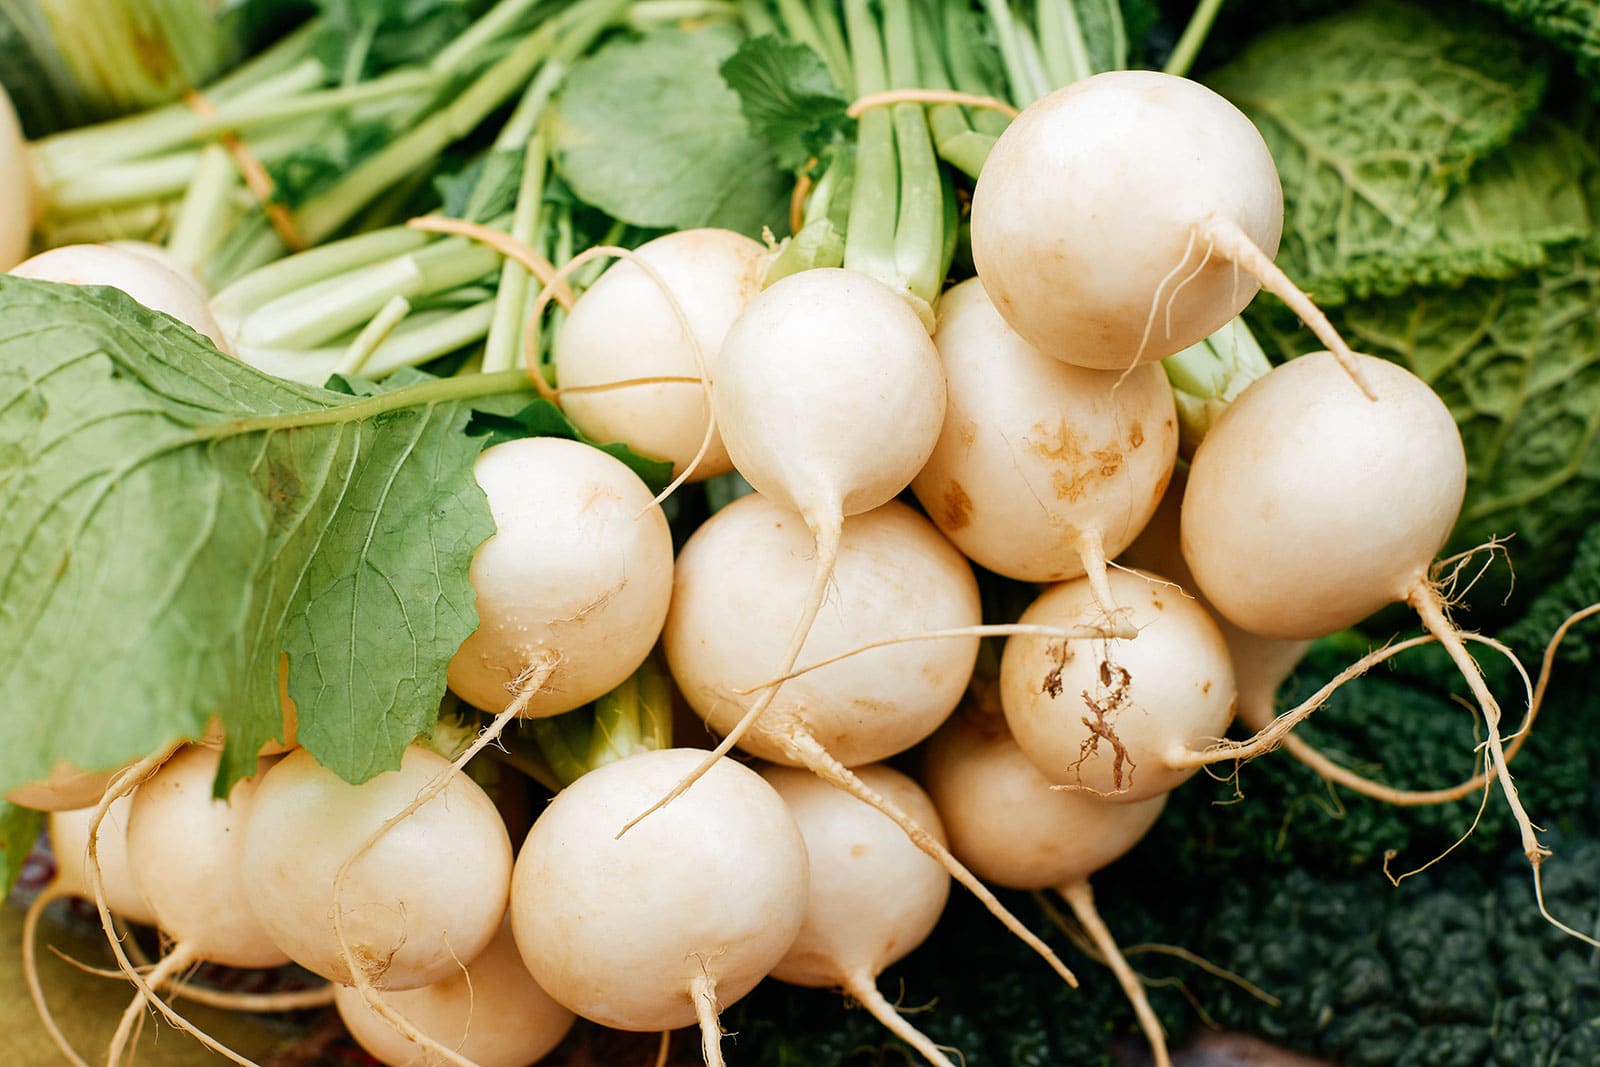 Bundle of baby white turnips tied together